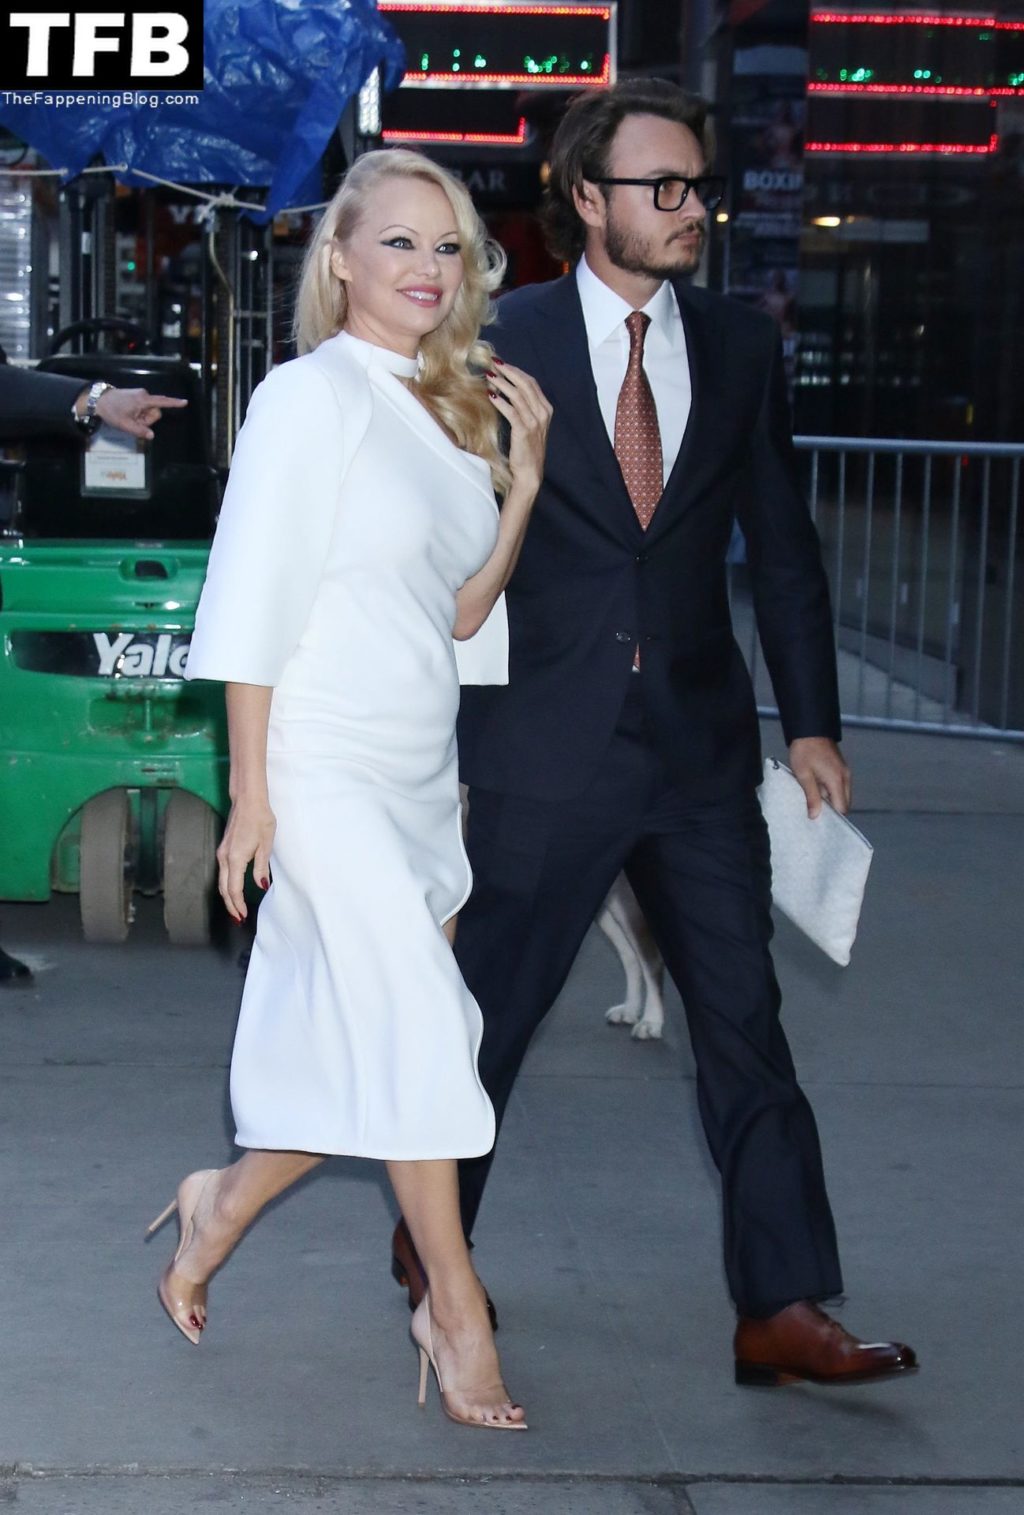 Pamela Anderson Sexy The Fappening Blog 21 1024x1515 - Pamela Anderson Heads to Good Morning America (107 Photos + Video)